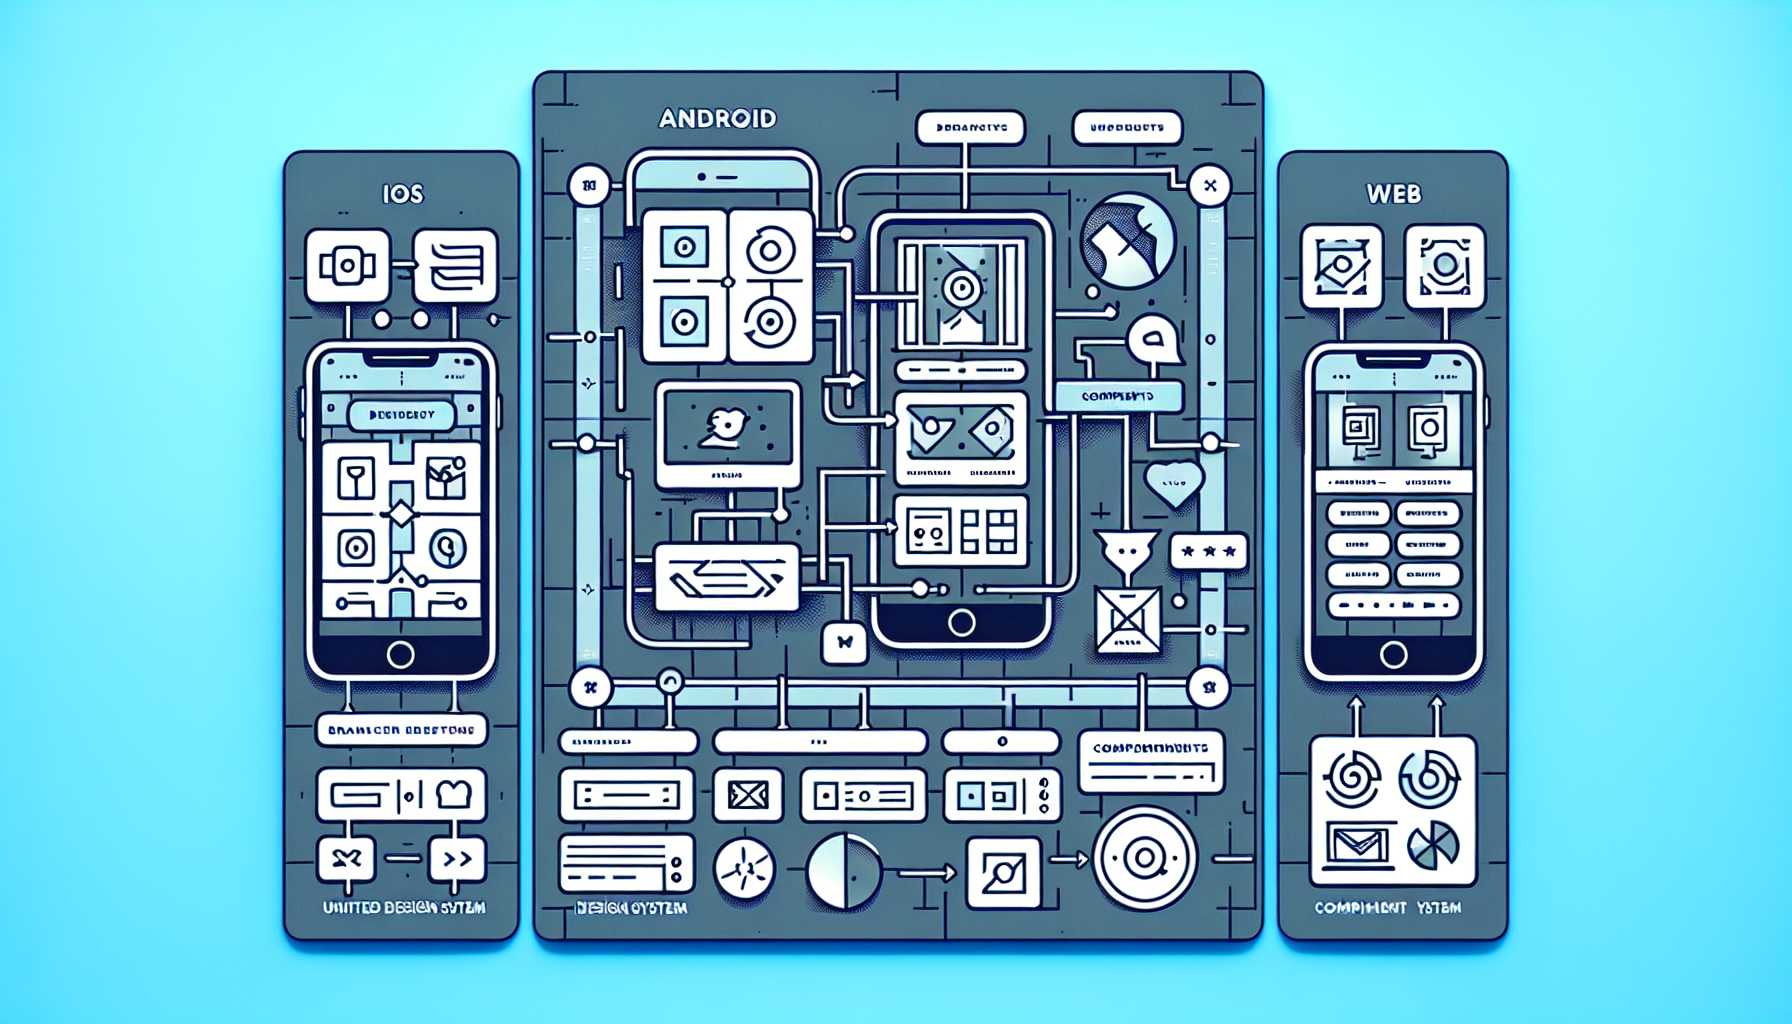 organigram showing unified design system components across iOS, Android, and Web platforms for a tech product